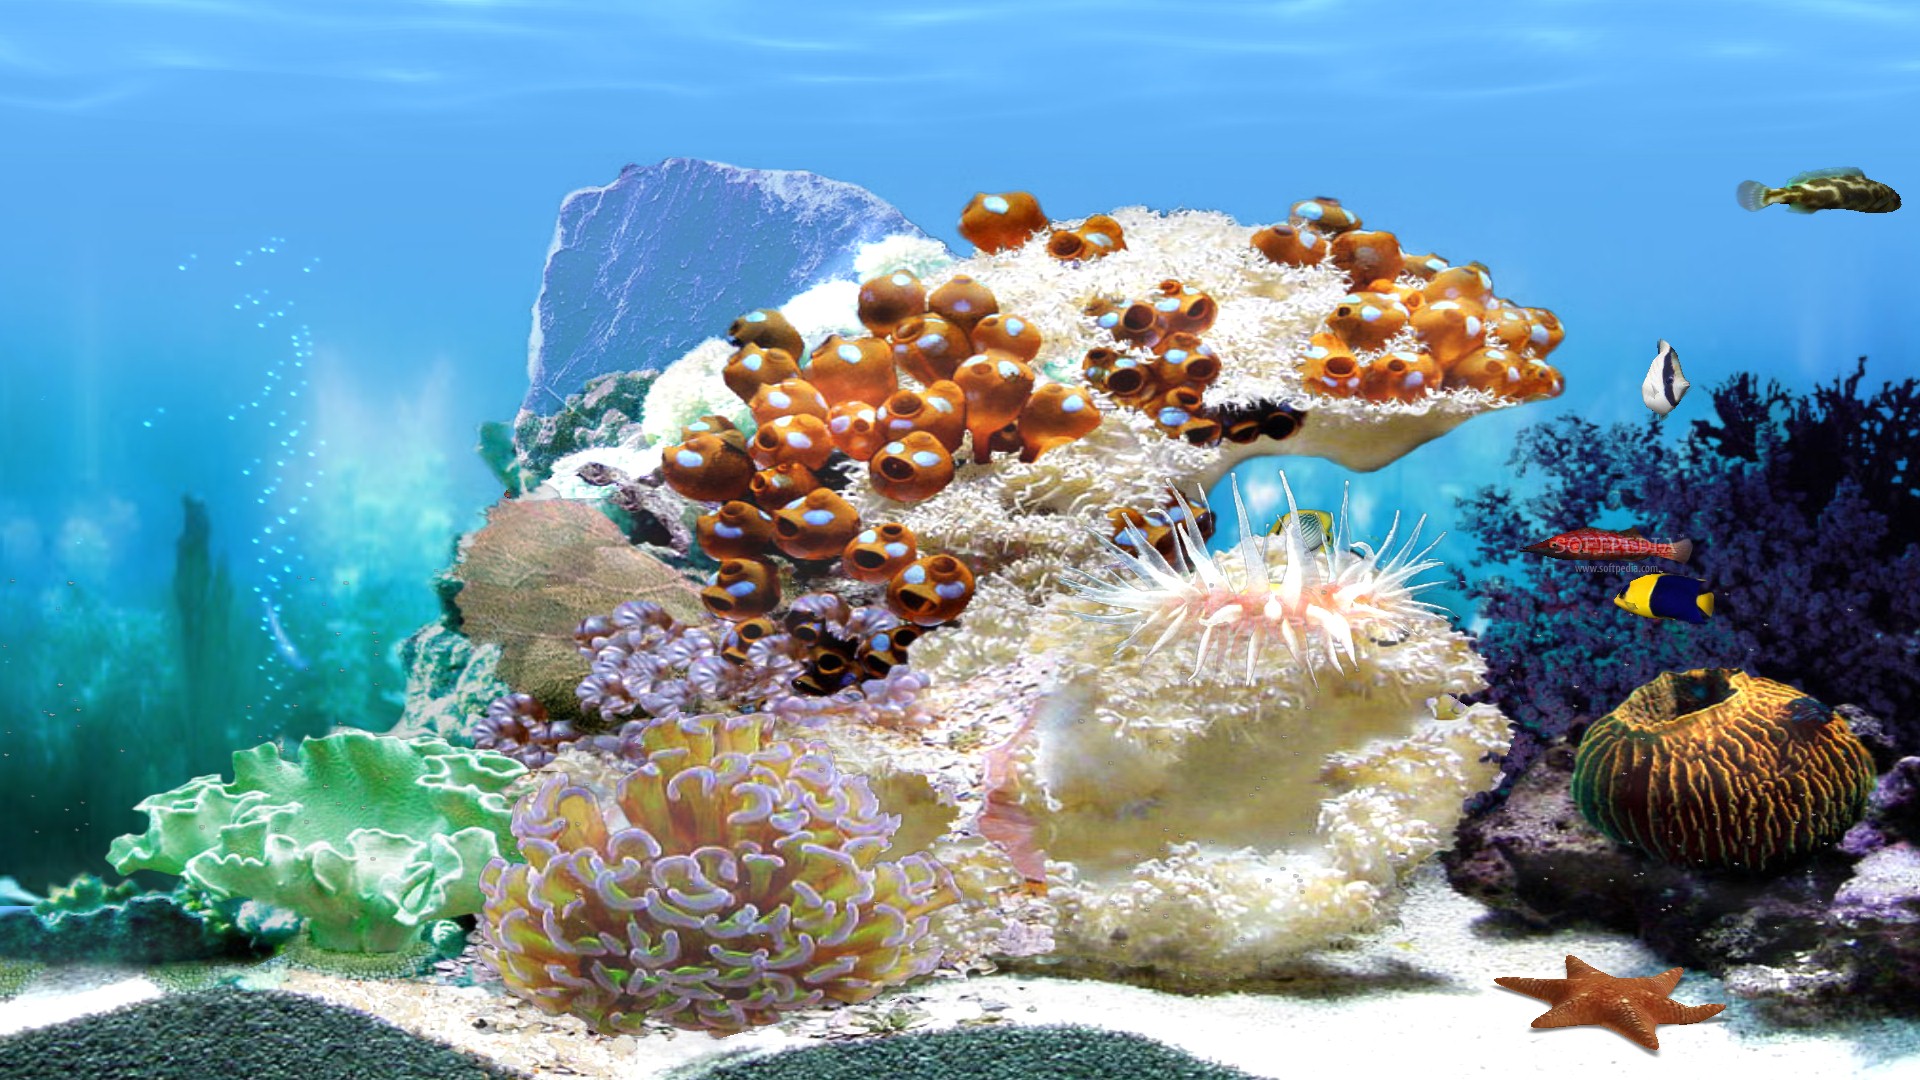 Amazing 3d Aquarium With The Help Of This Screensaver You Will Get A